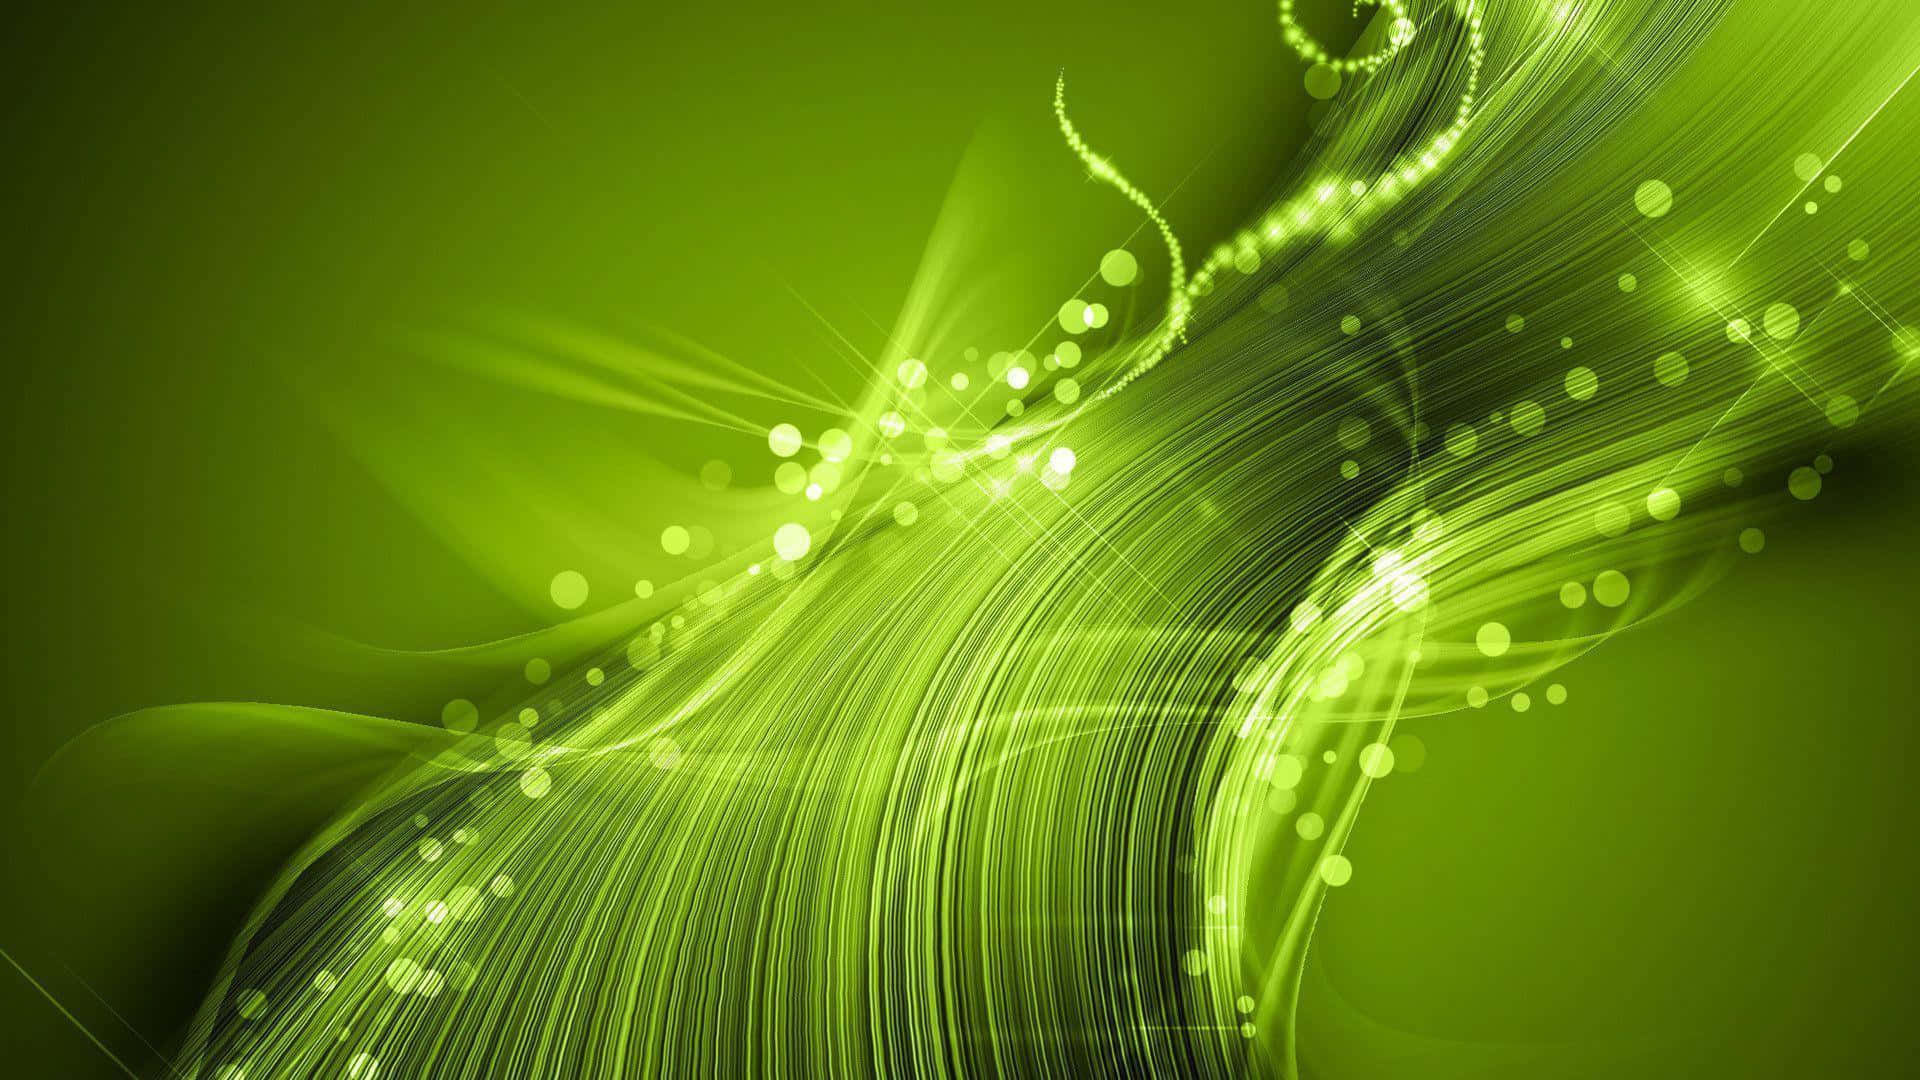 Discover the beauty of Green LED Wallpaper